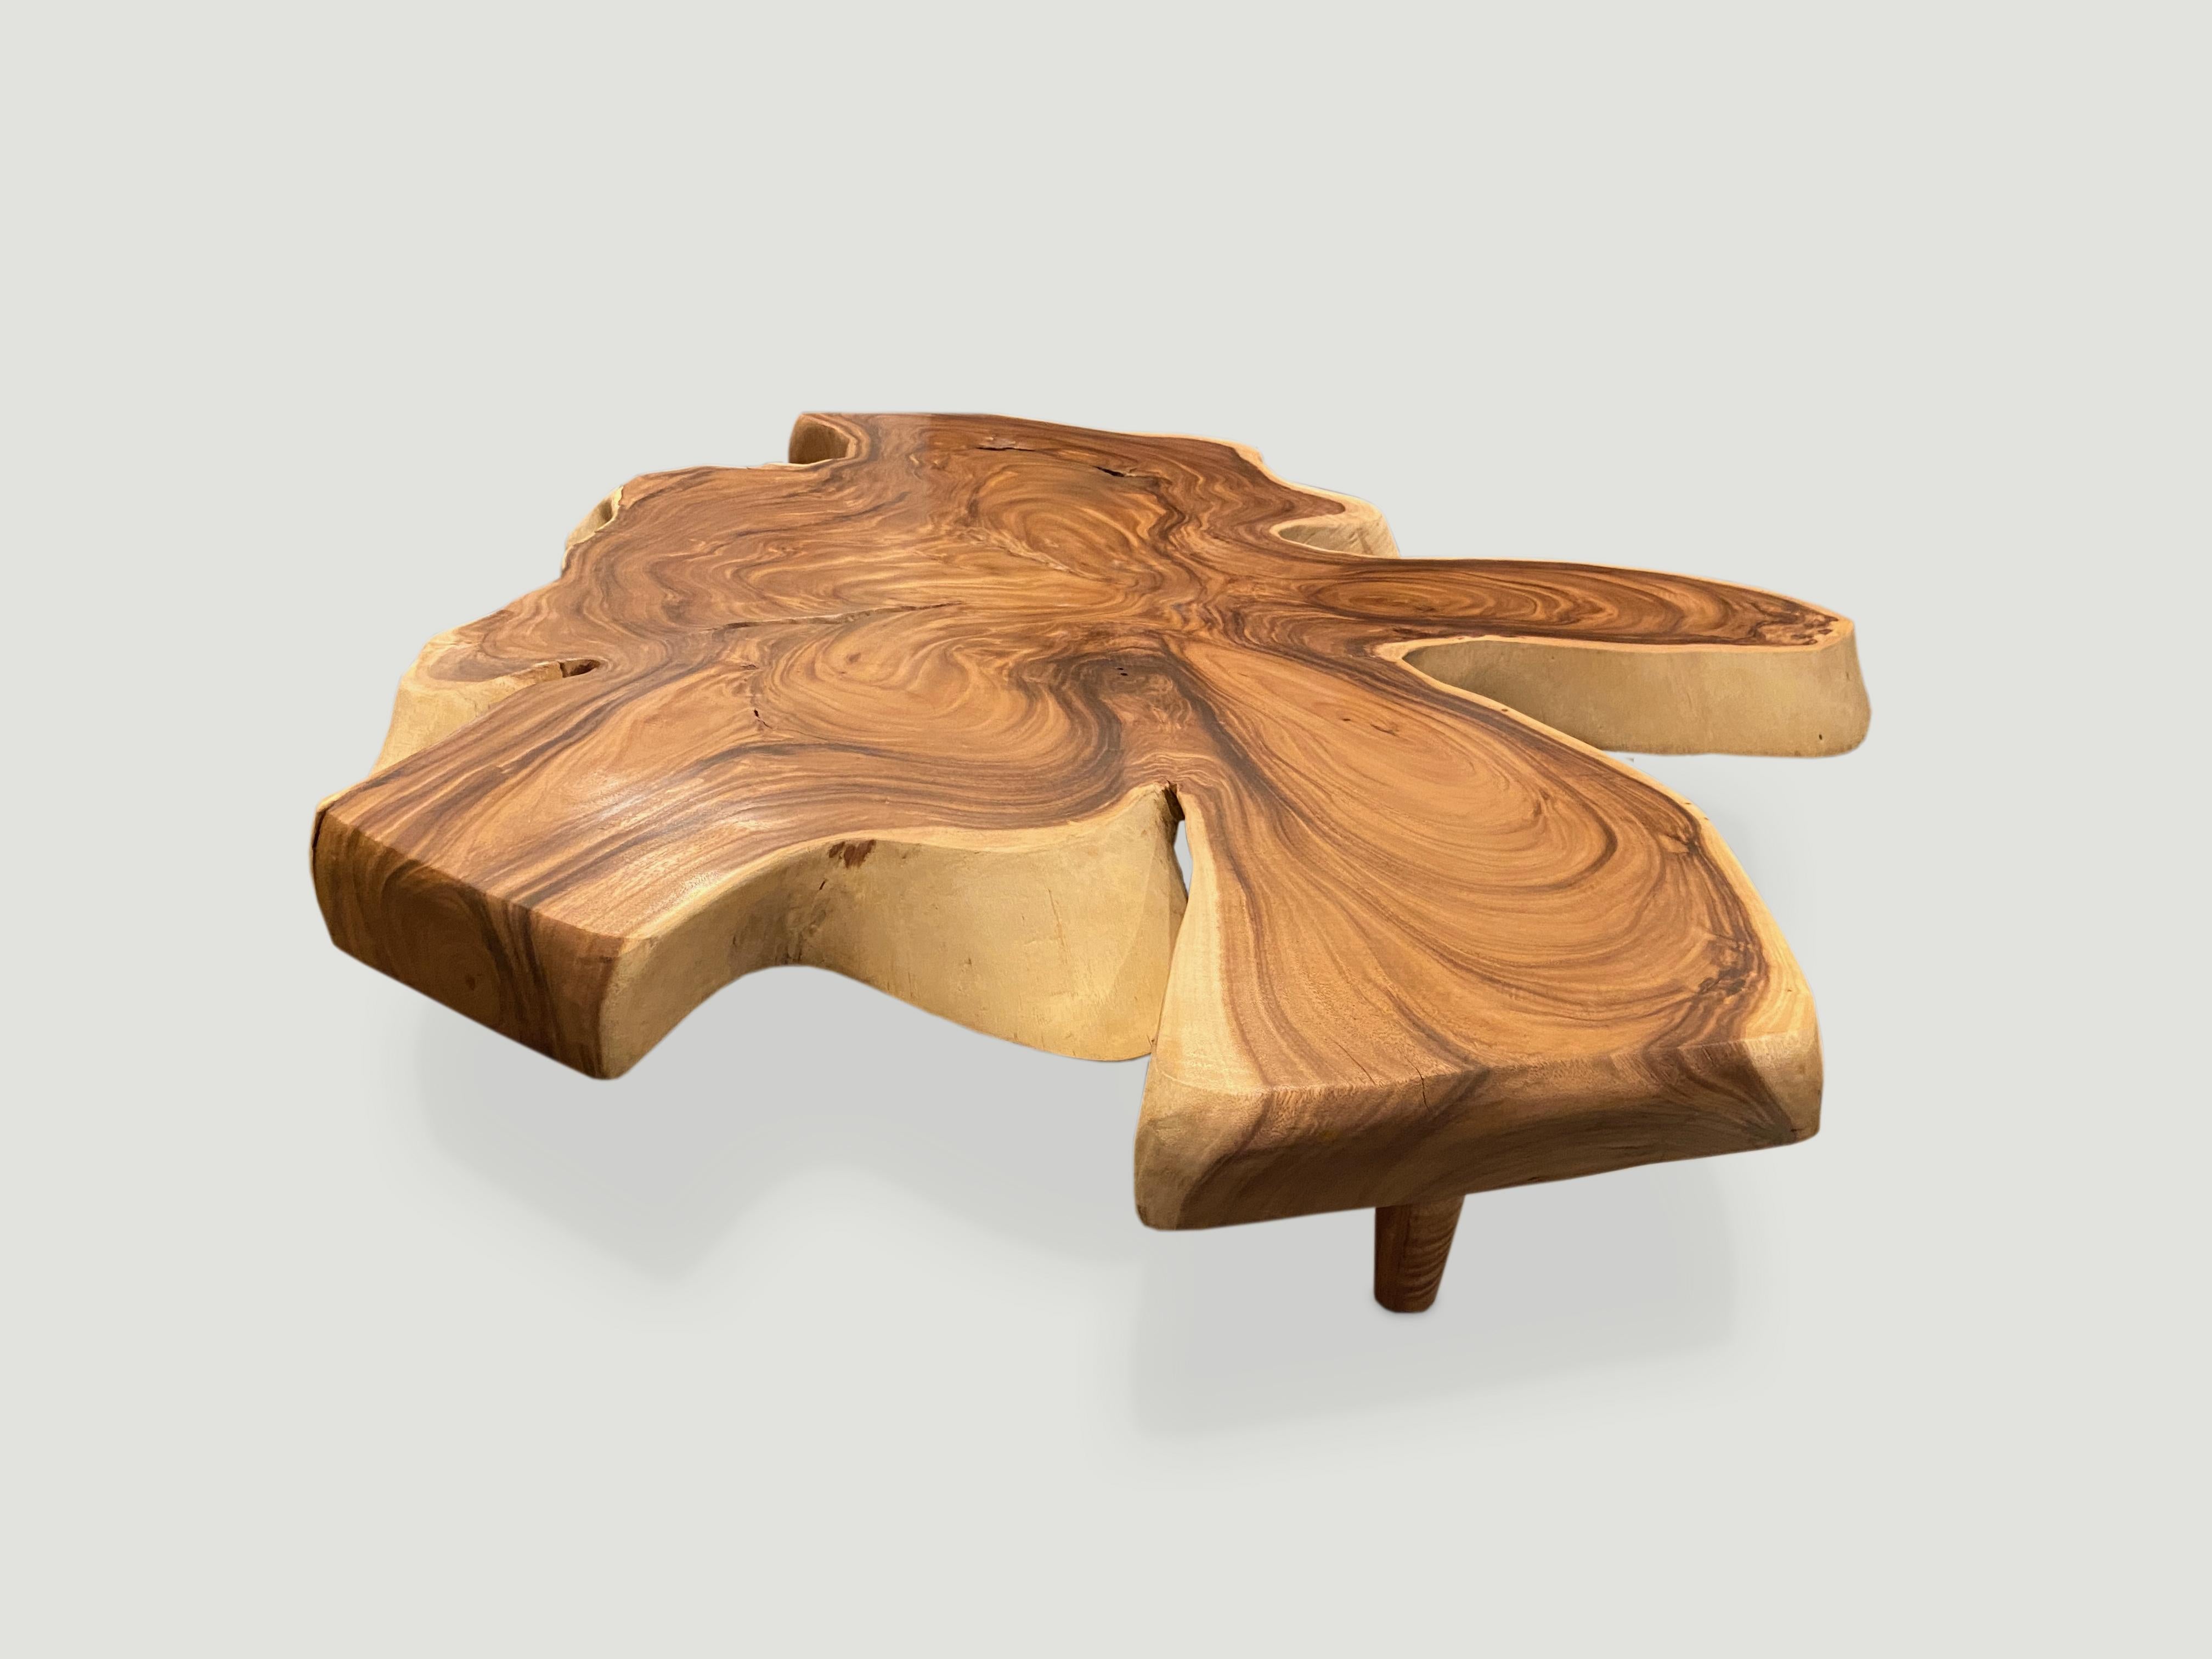 Impressive reclaimed four inch thick slab suar wood coffee table. We added the midcentury style legs and polished the top with a natural oil finish to enhance the grain. Organic is the new modern.

Andrianna Shamaris. The Leader In Modern Organic